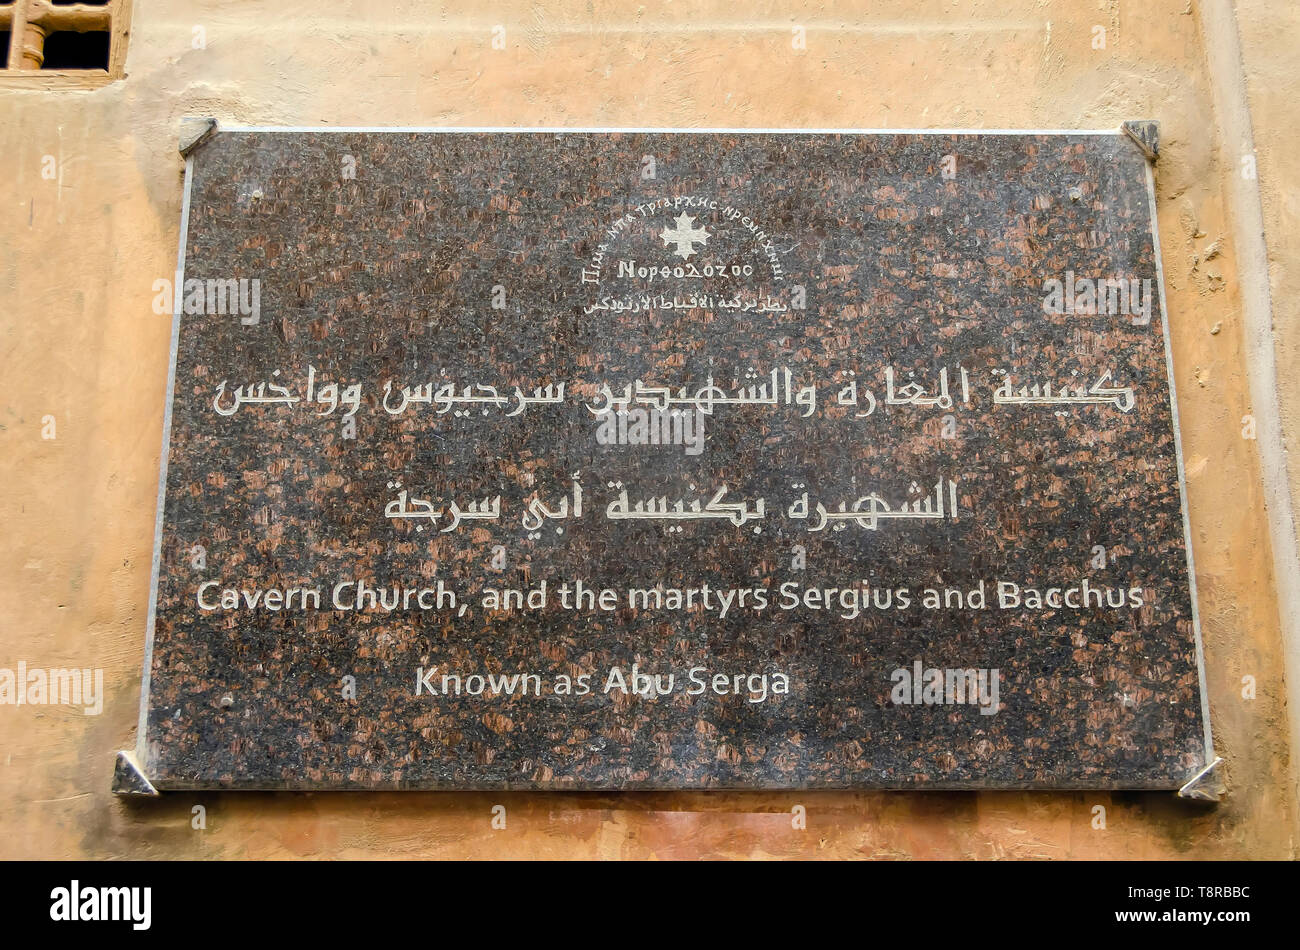 Saints Sergius and Bacchus Church exterior marker sign in Coptic Old Cairo Egypt Stock Photo